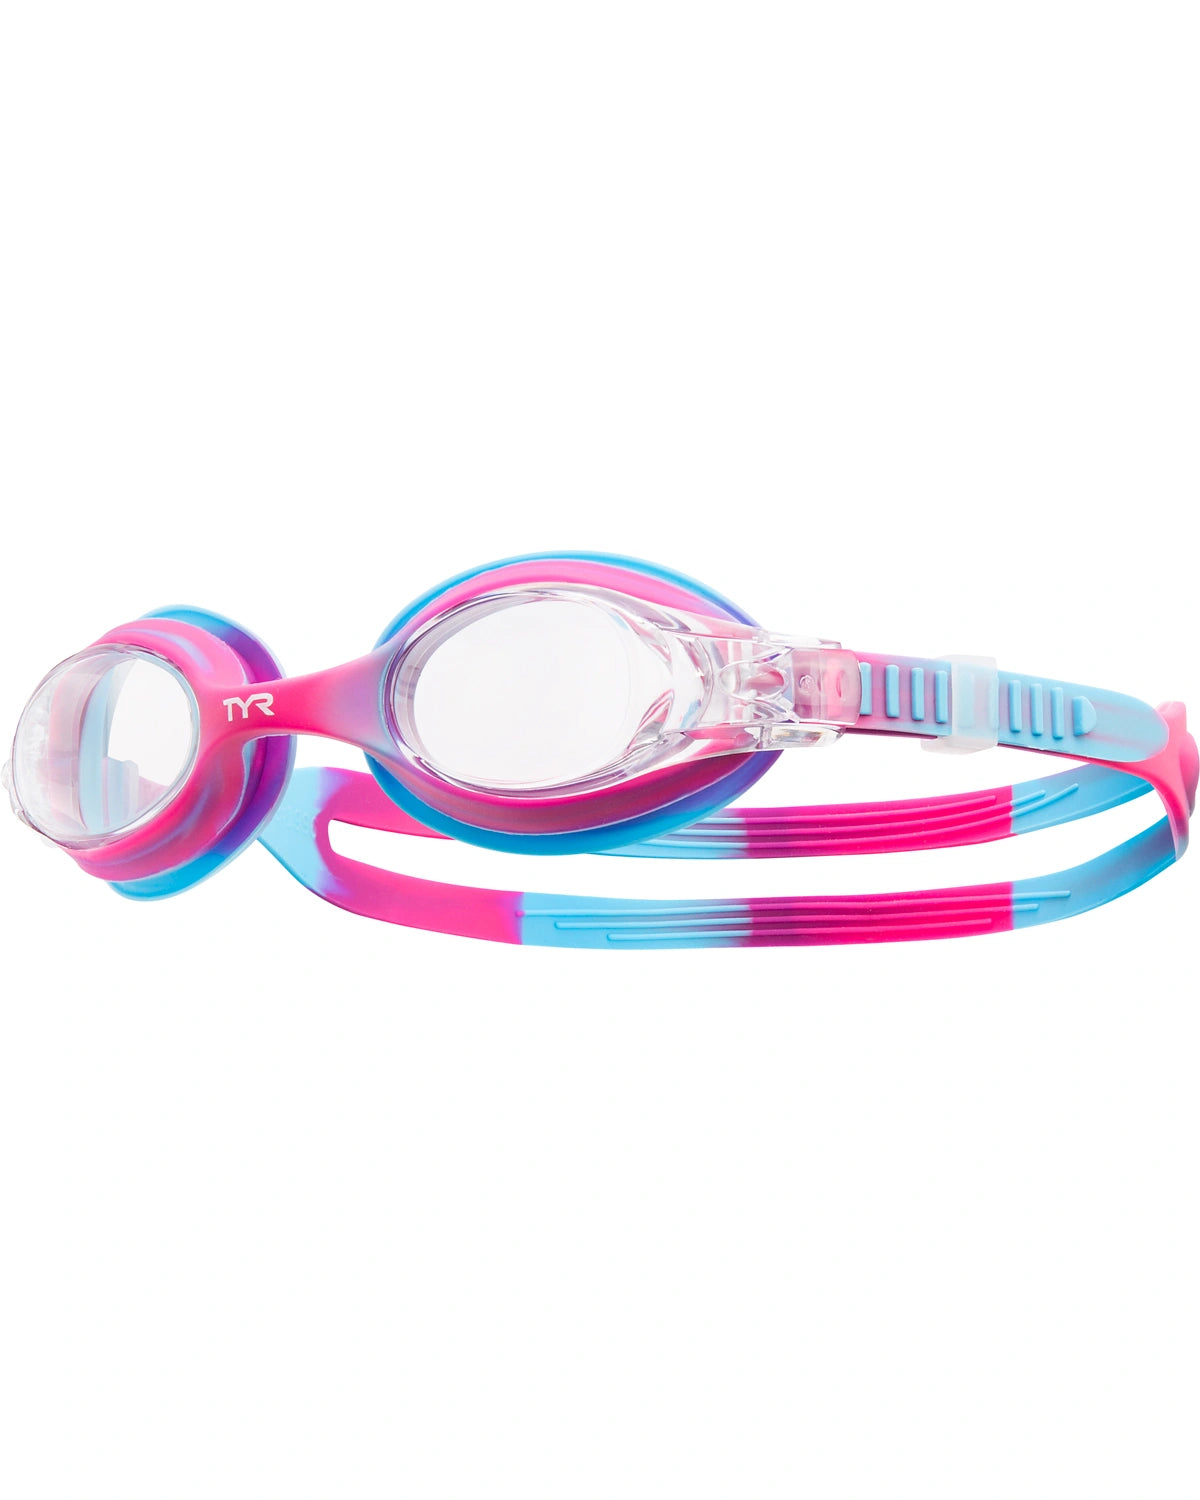 TYR Swimples Tie Dye Kids Goggles (Pink/Blue)